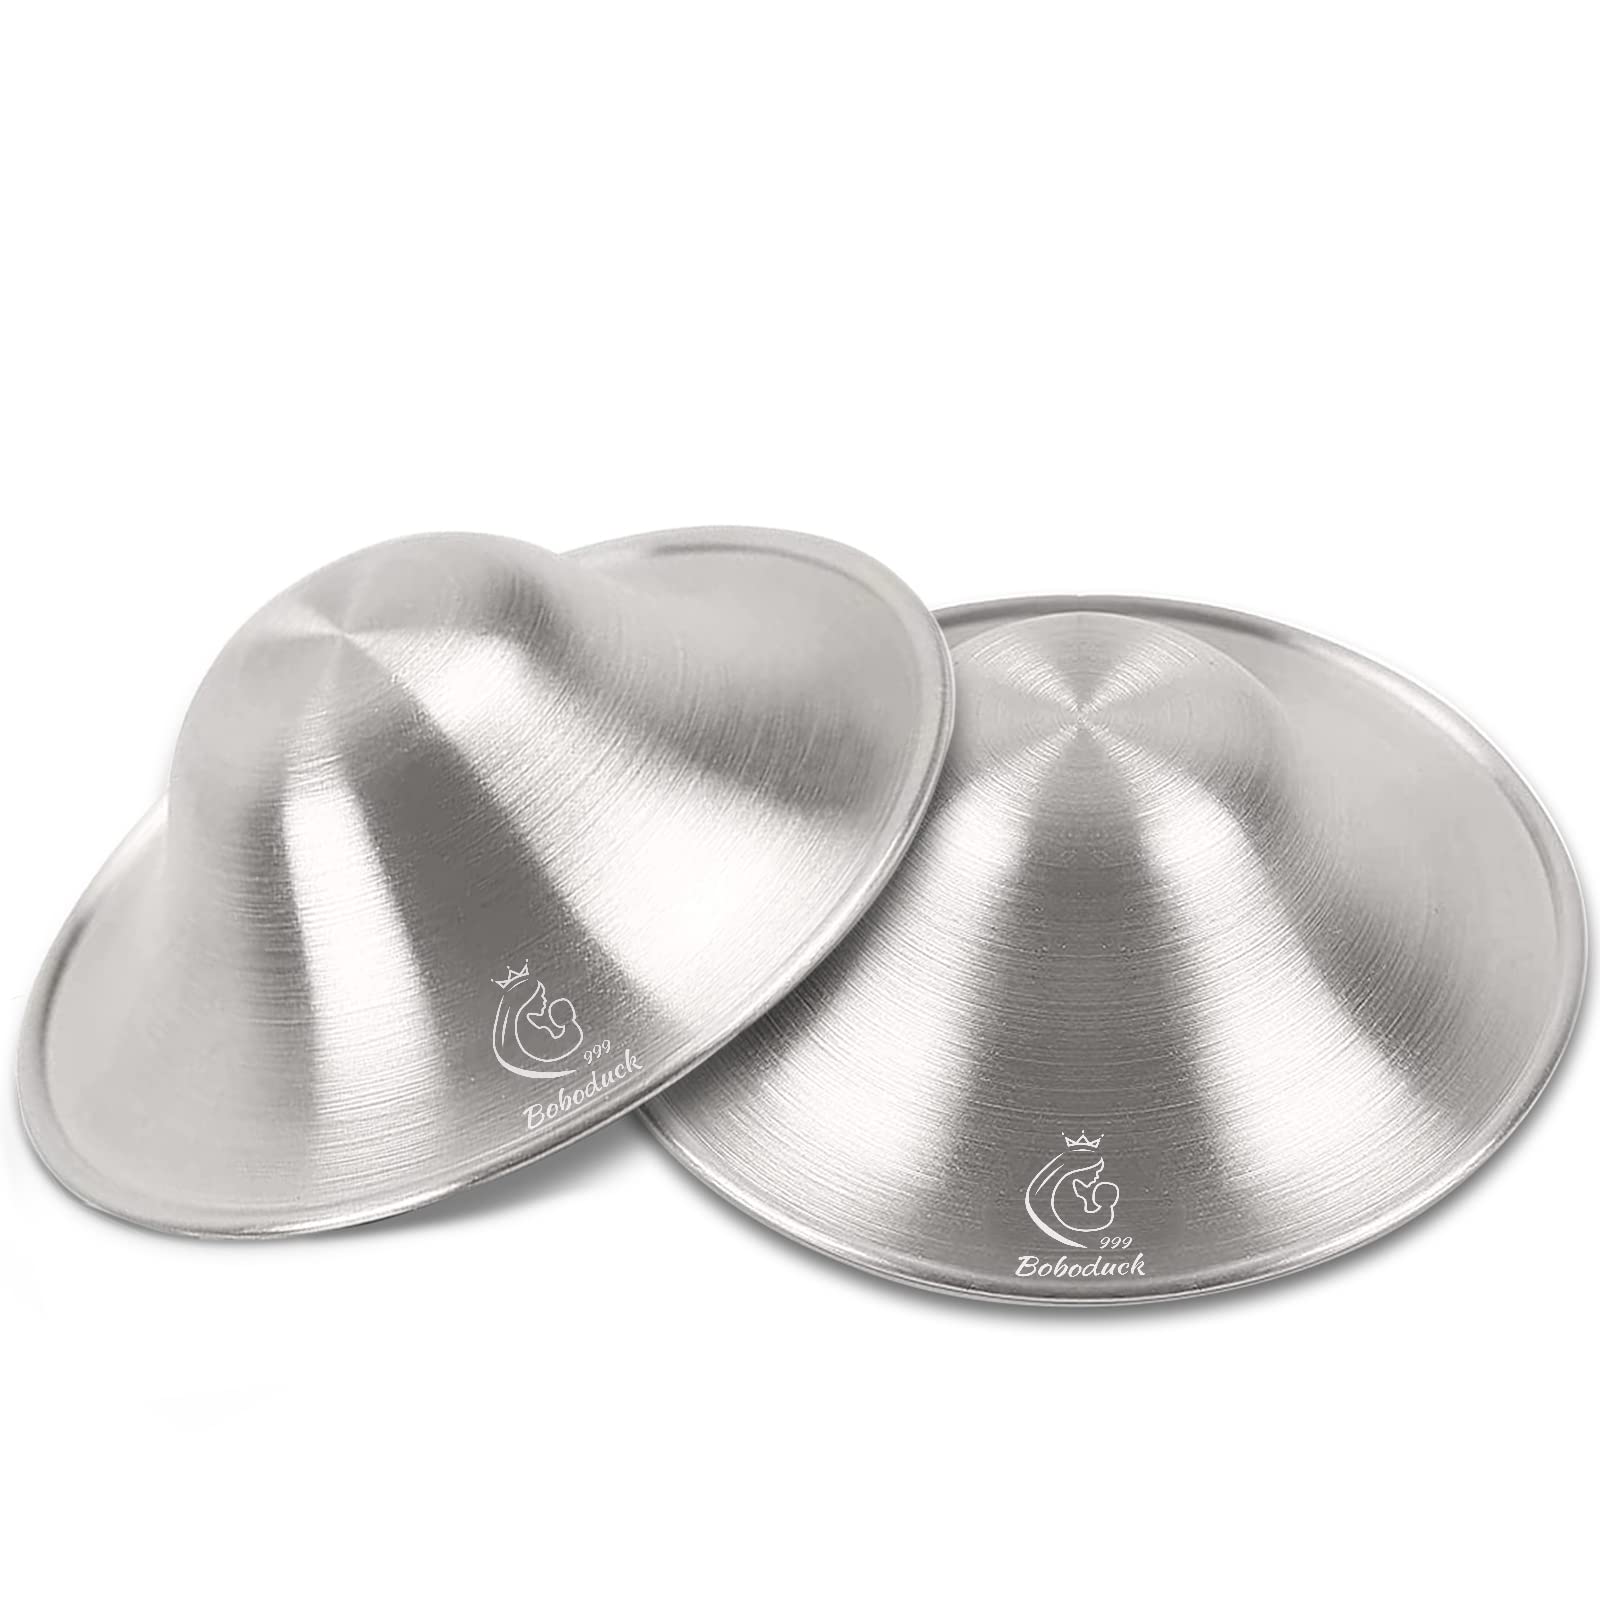 The Original Silverette Silver Nursing Cups - Soothe and protect your  nursing nipples - The ORIGINAL Silver Nursing Cups made